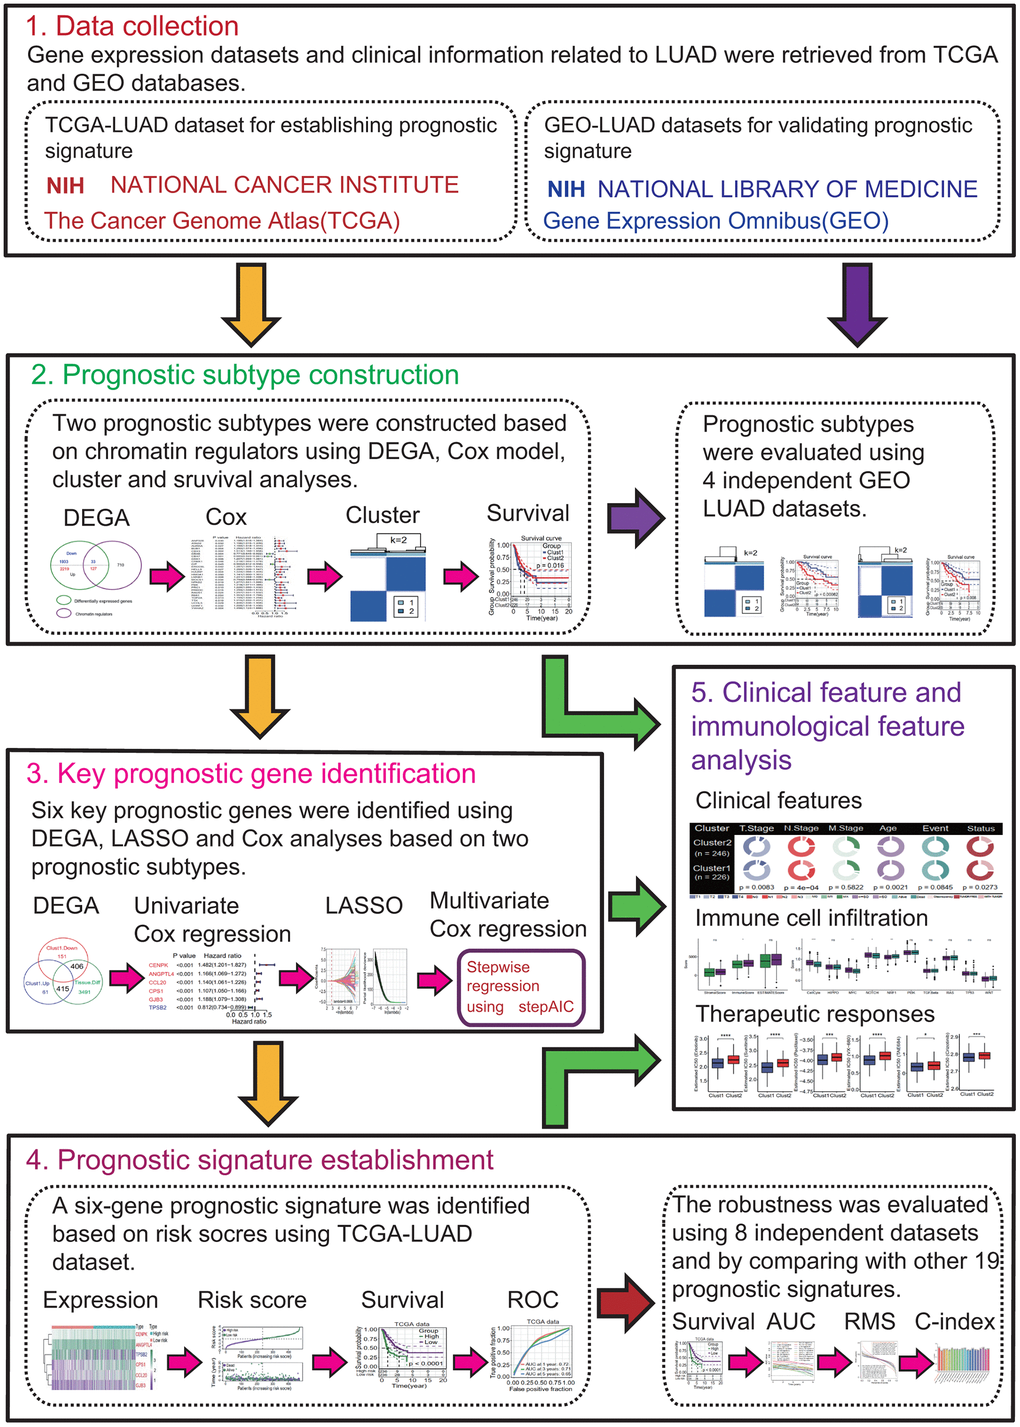 Flow chart of the present study. This study was divided into 5 research modules sequentially. (1) Data collection. Lung adenocarcinoma (LUAD) gene expression datasets were retrieved from the public gene expression omnibus (GEO) and the cancer genome atlas (TCGA) databases, respectively. (2) Prognostic subtype construction. Prognostic subtypes were constructed based on prognostic chromatin regulators. (3) Key prognostic gene identification. Key prognostic genes were identified by Cox regression and the least absolute shrinkage and selection operator (LASSO) analyses. (4) Prognostic signature establishment. Prognostic signature was established and evaluated. (5) Clinical feature and immunological feature analyses. The relationships of prognostic subtypes, prognostic genes and signature with clinical characteristics and immunological features were analyzed.